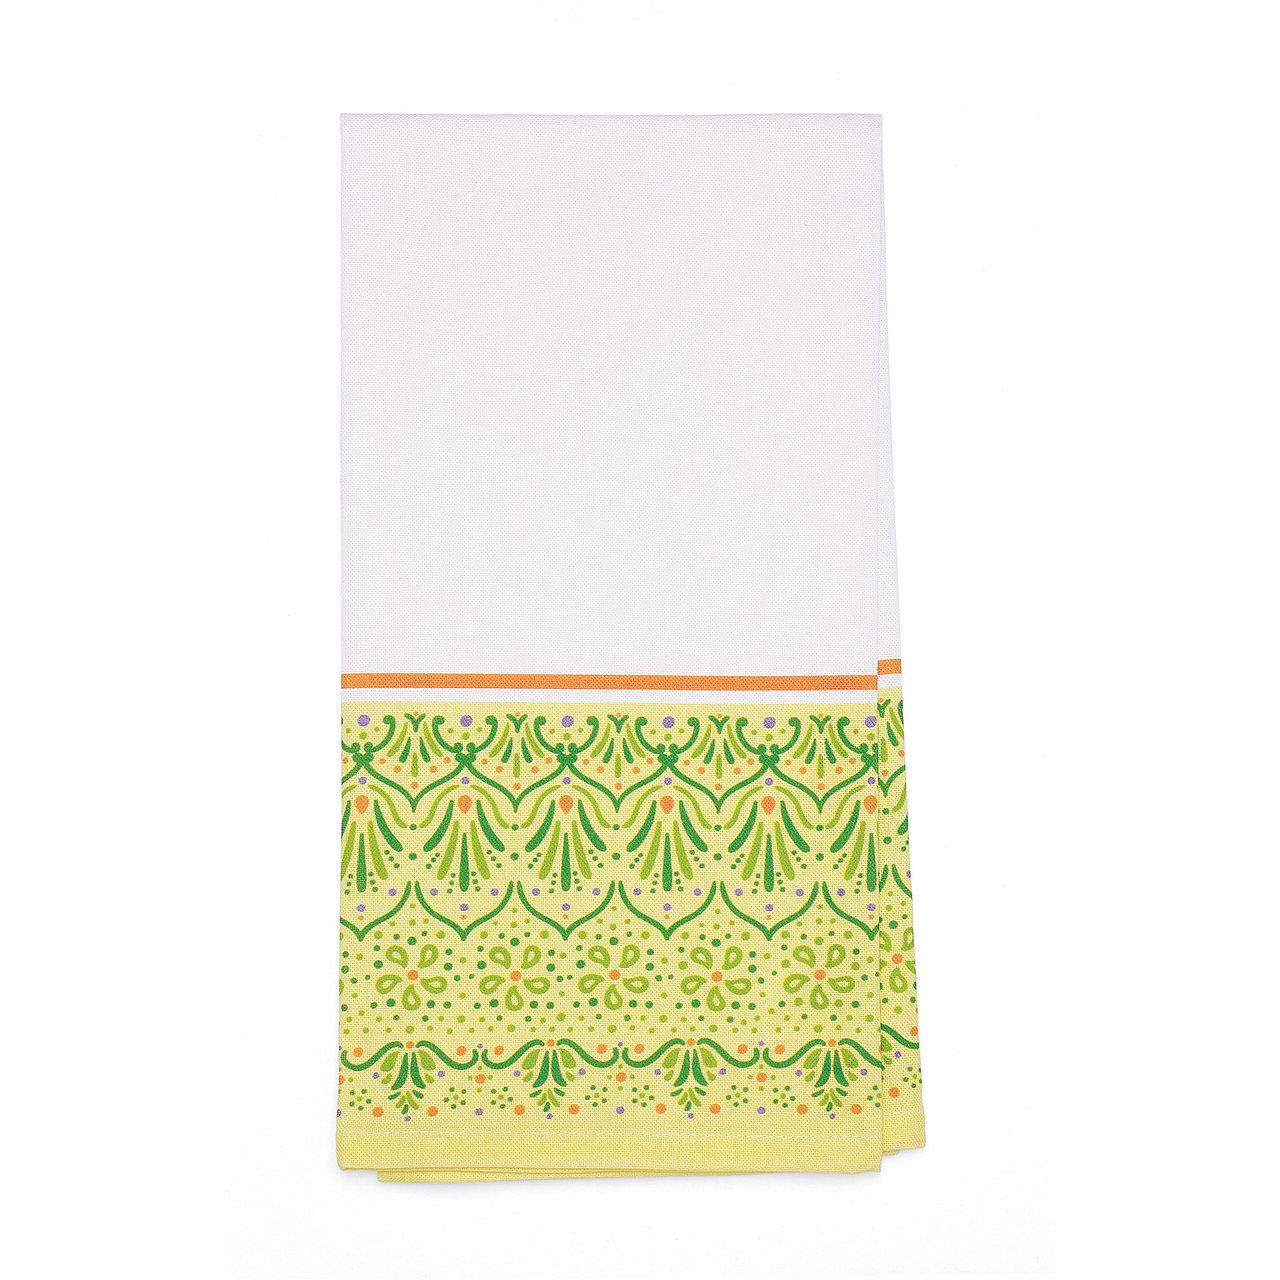 Izzy & Oliver Lemon Henna Tea Towel  Made from absorbent material, this towel is great for drying glasses, but also makes a decorative statement. Perfect for everyday use or gift giving.